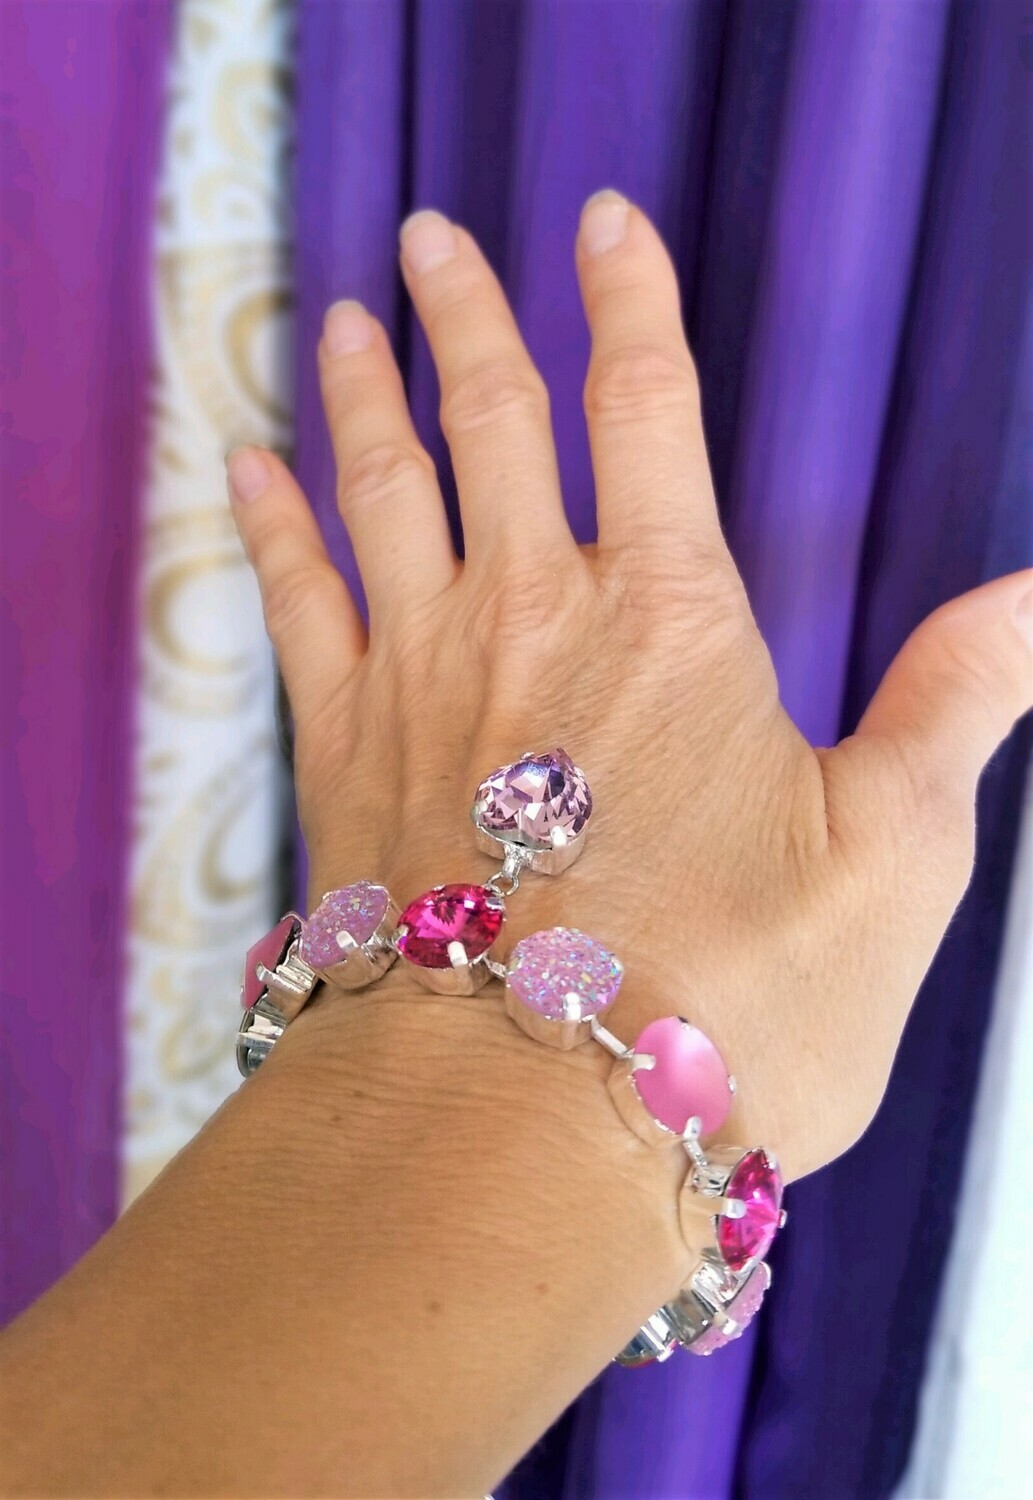 Gorgeous Heart of the Rose Ray/Devic Crystal LOVE Bracelet $144/$188 Retreat Sale